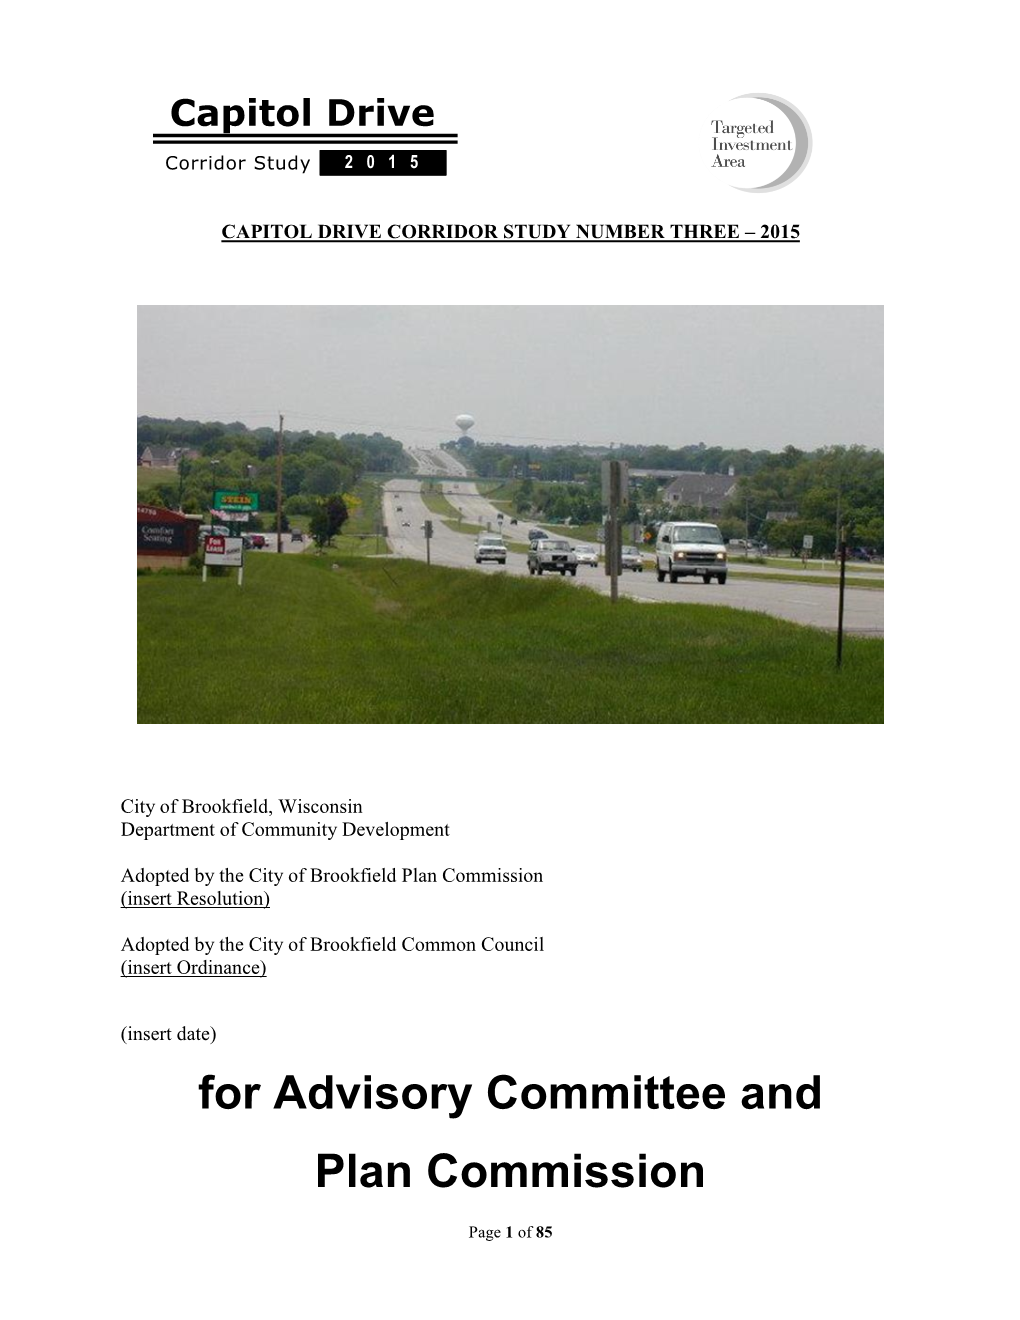 For Advisory Committee and Plan Commission